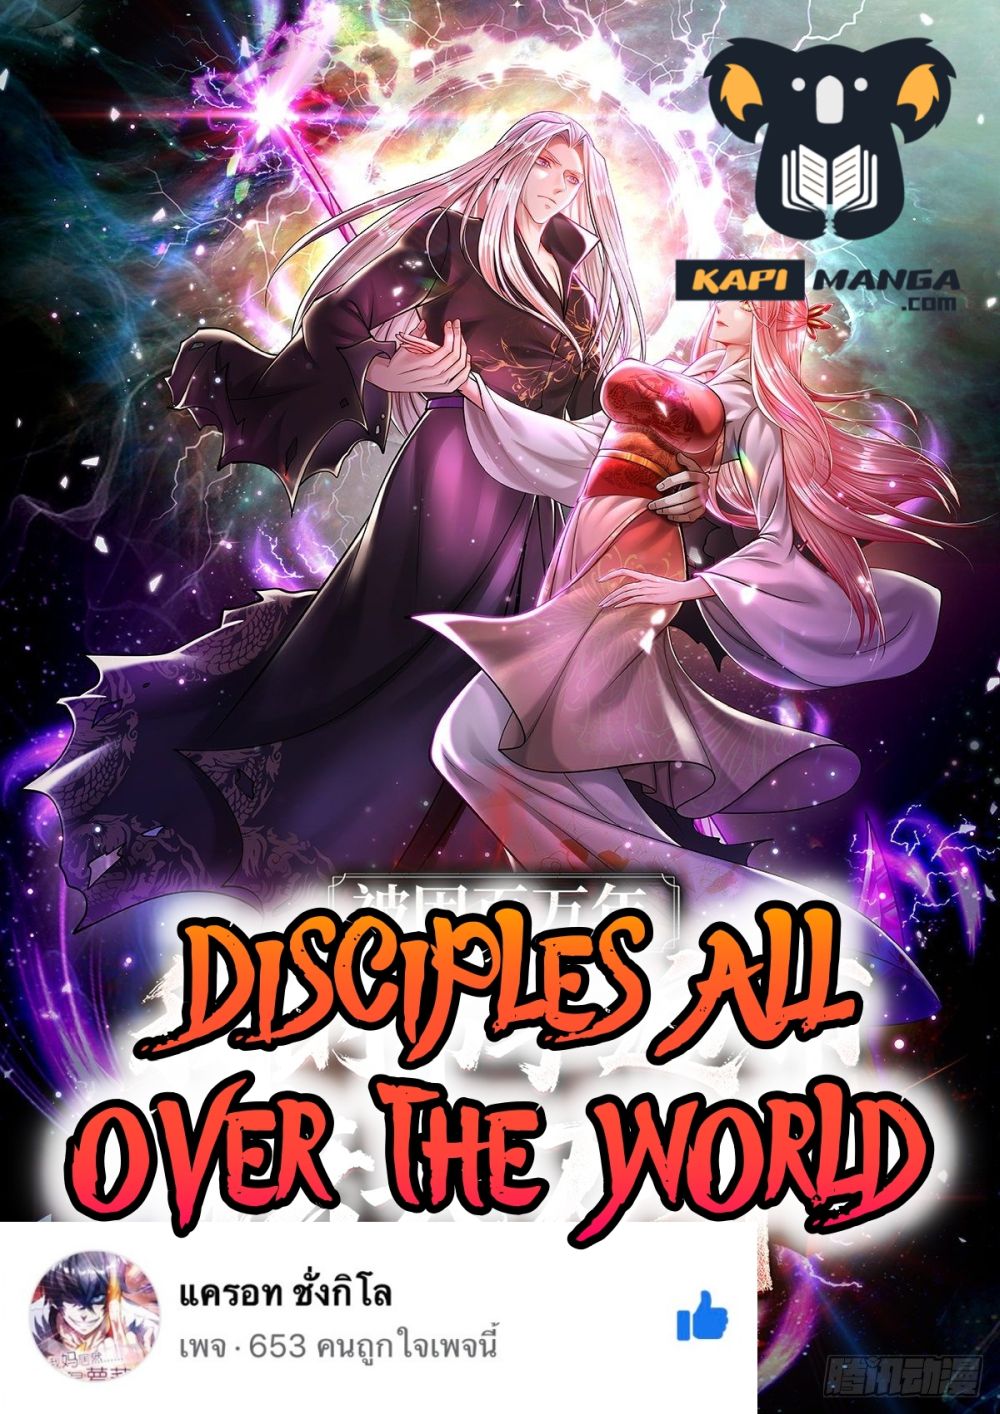 Disciples All Over the World à¸à¸­à¸à¸à¸µà¹ 29 (1)